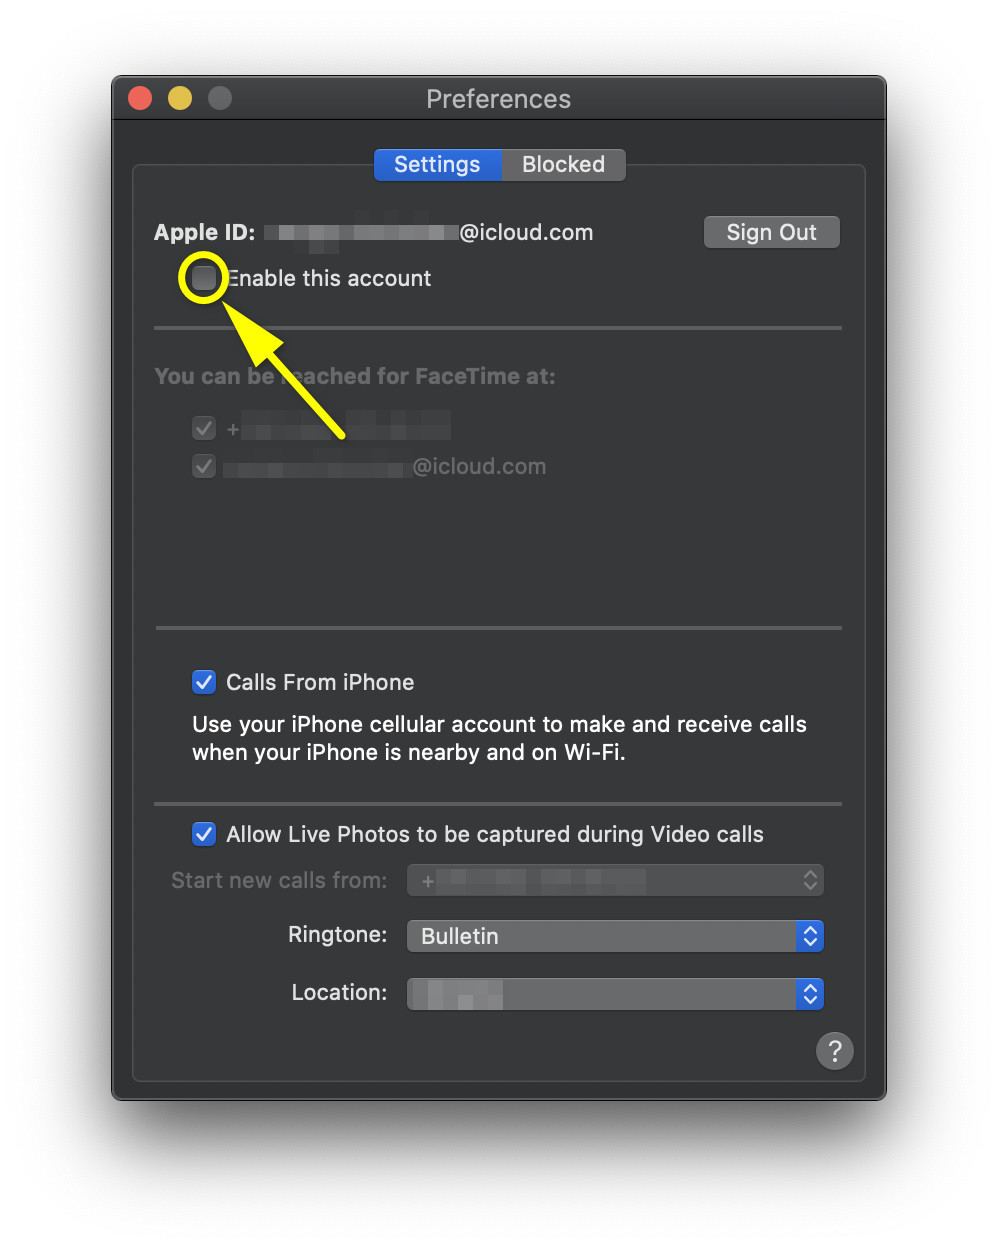 uncheck Enable this account to turn off Facetime on Mac